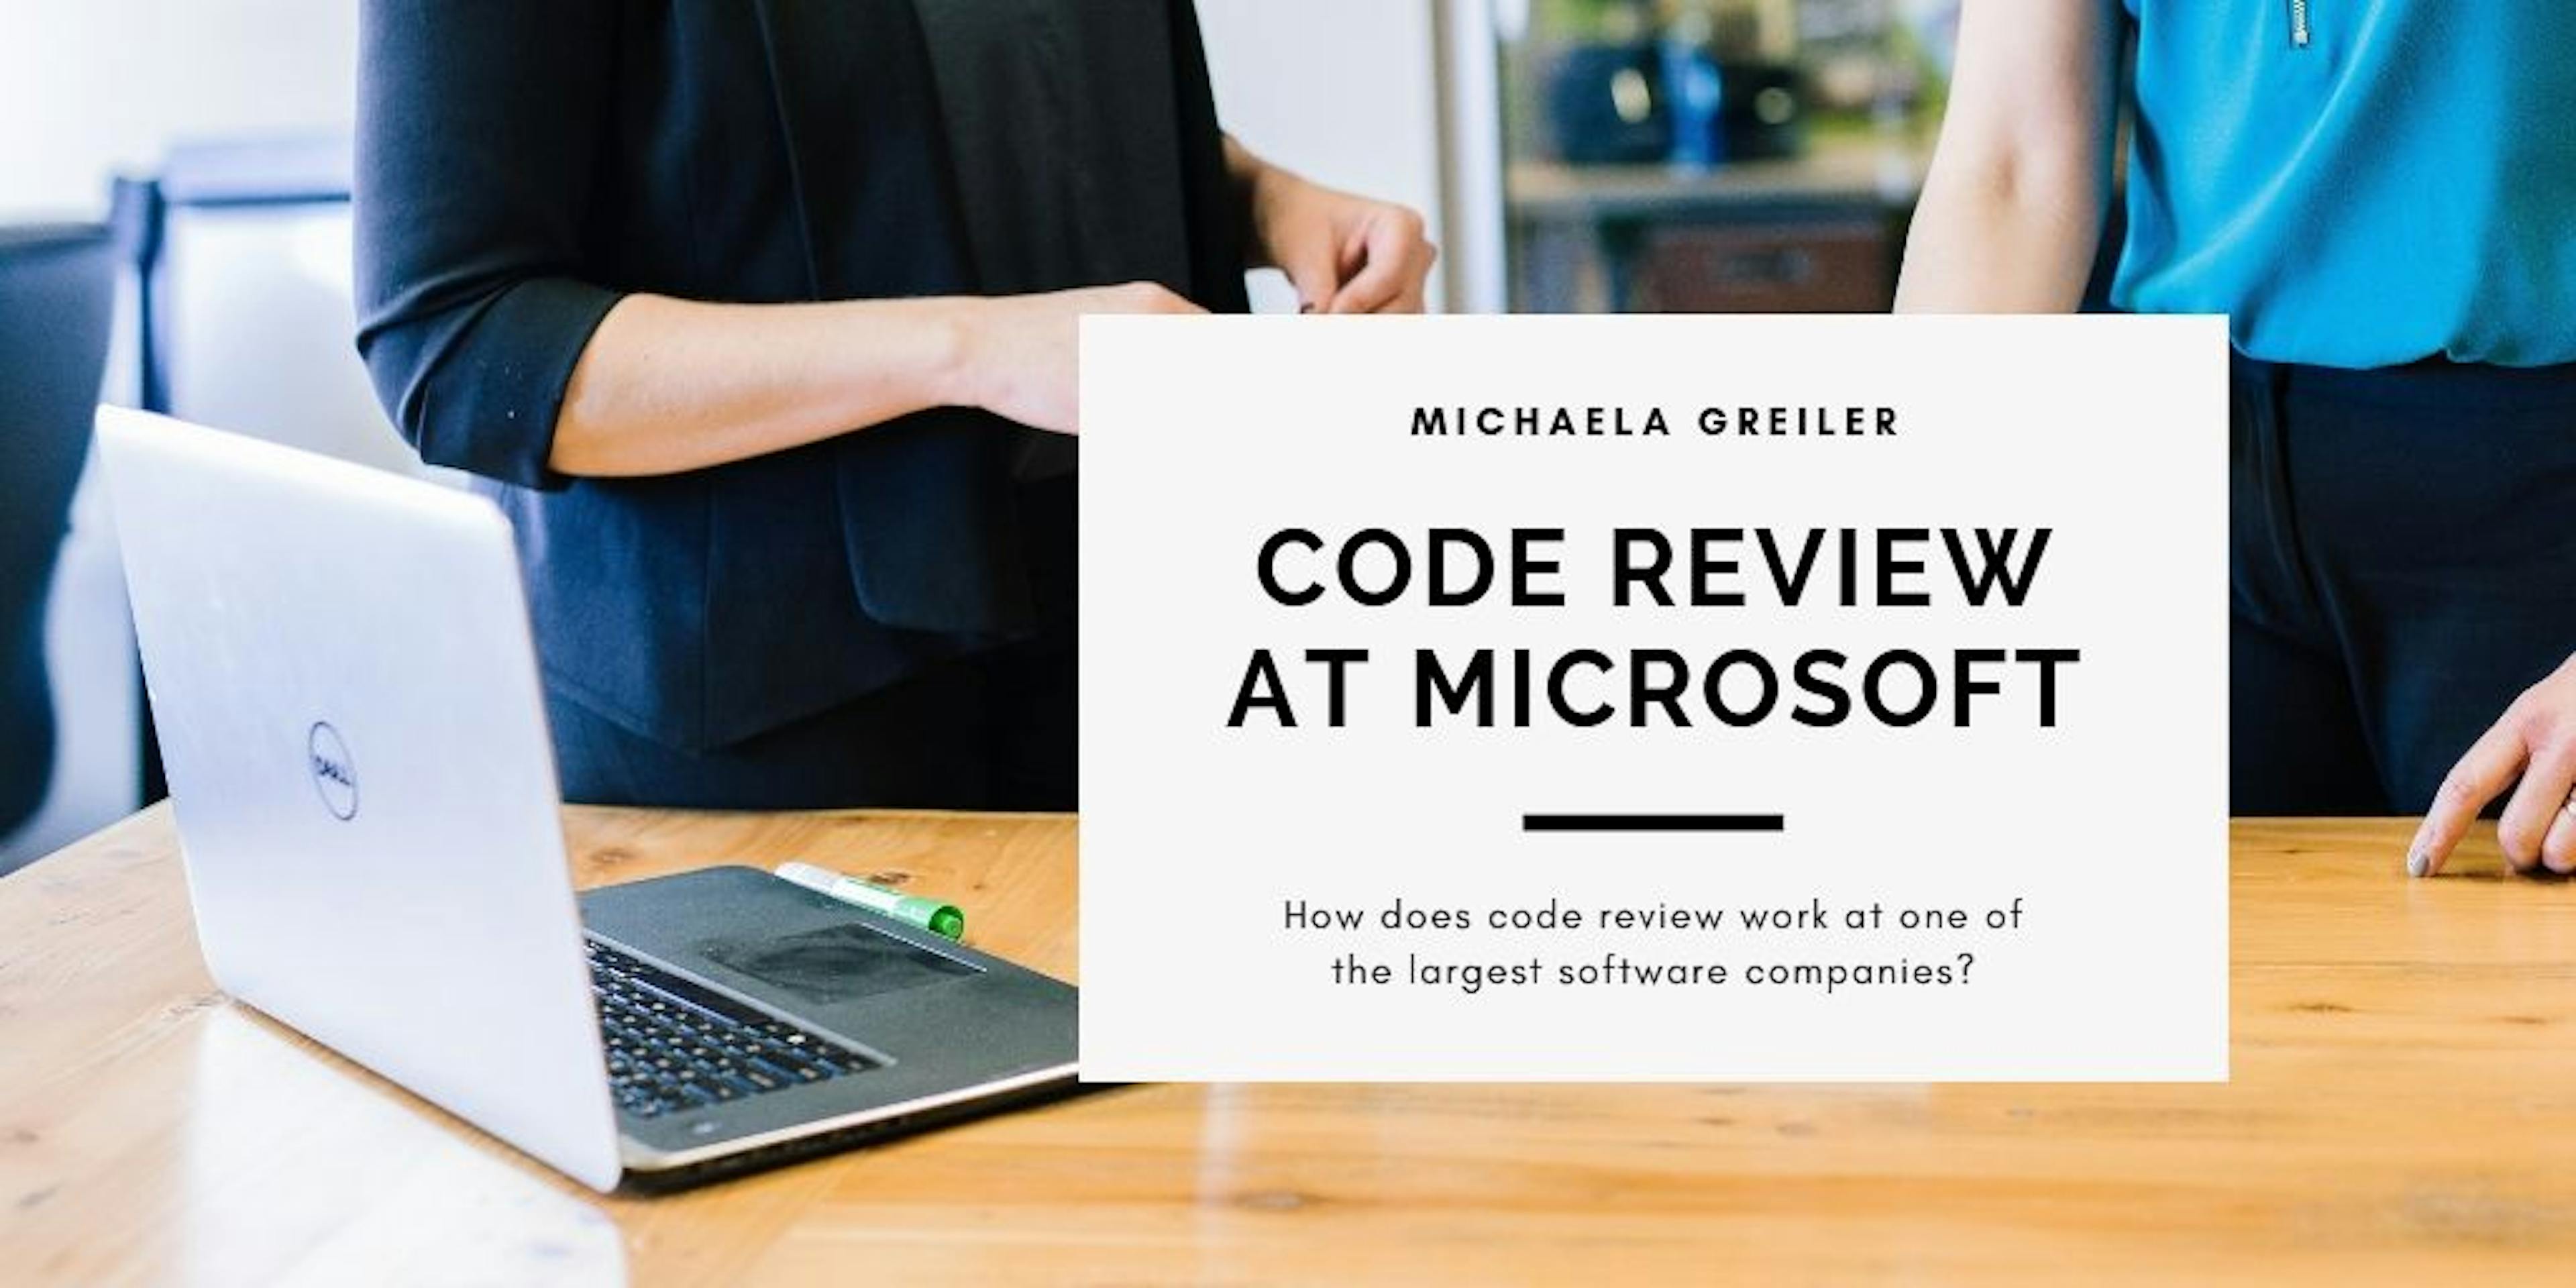 /how-code-reviews-work-at-microsoft-qe1t327y feature image